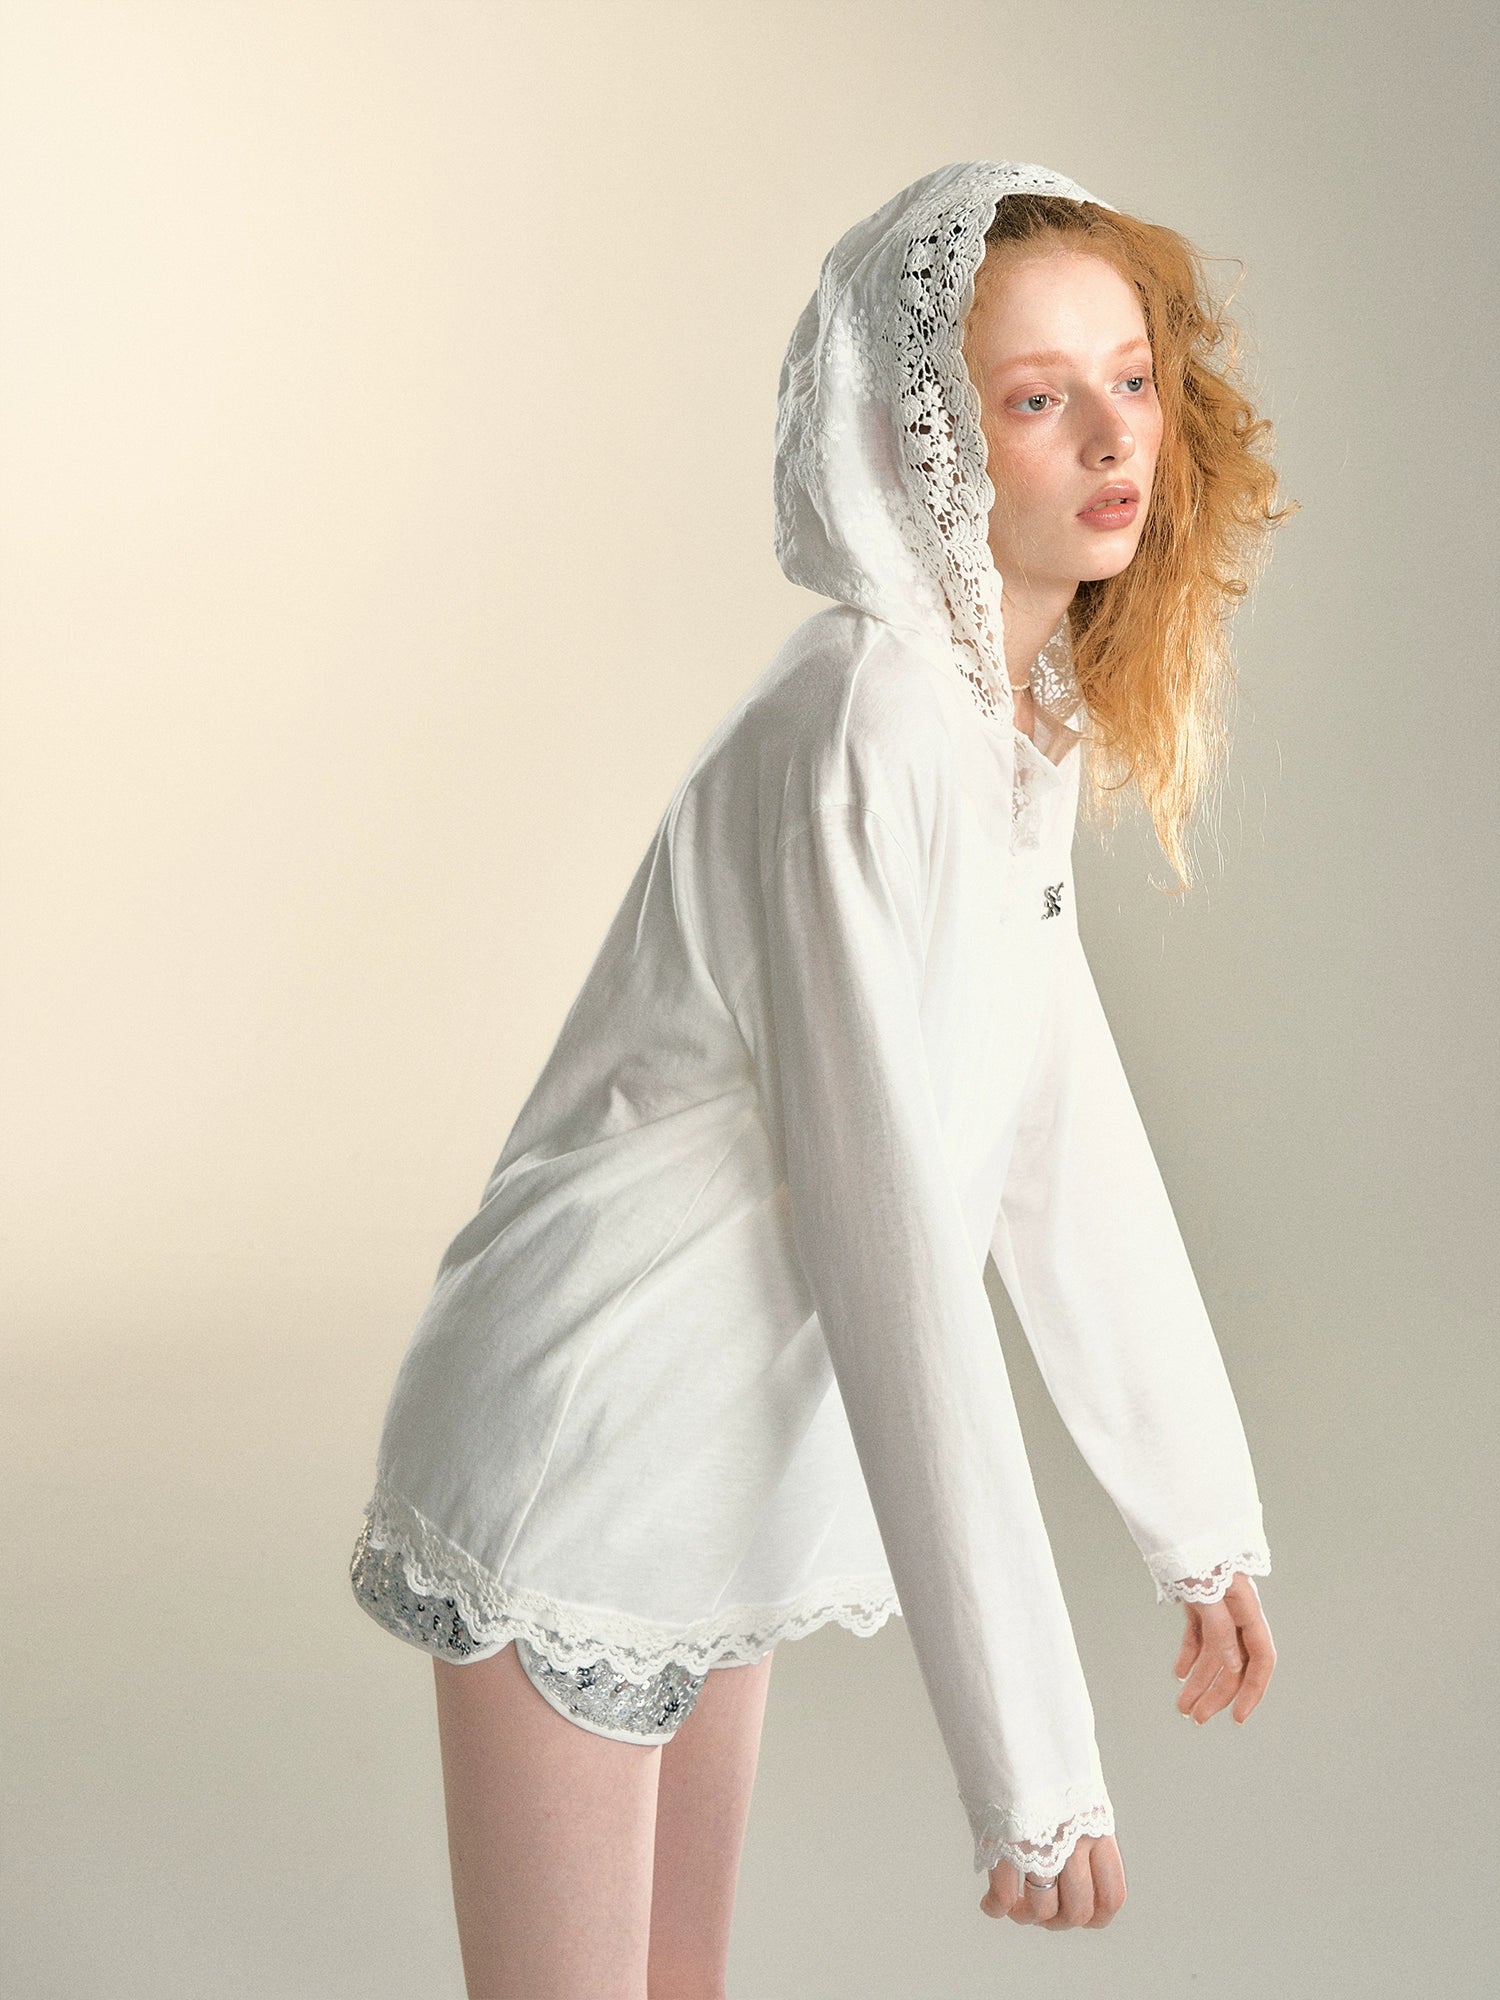 White Lace Hooded Top - CHINASQUAD